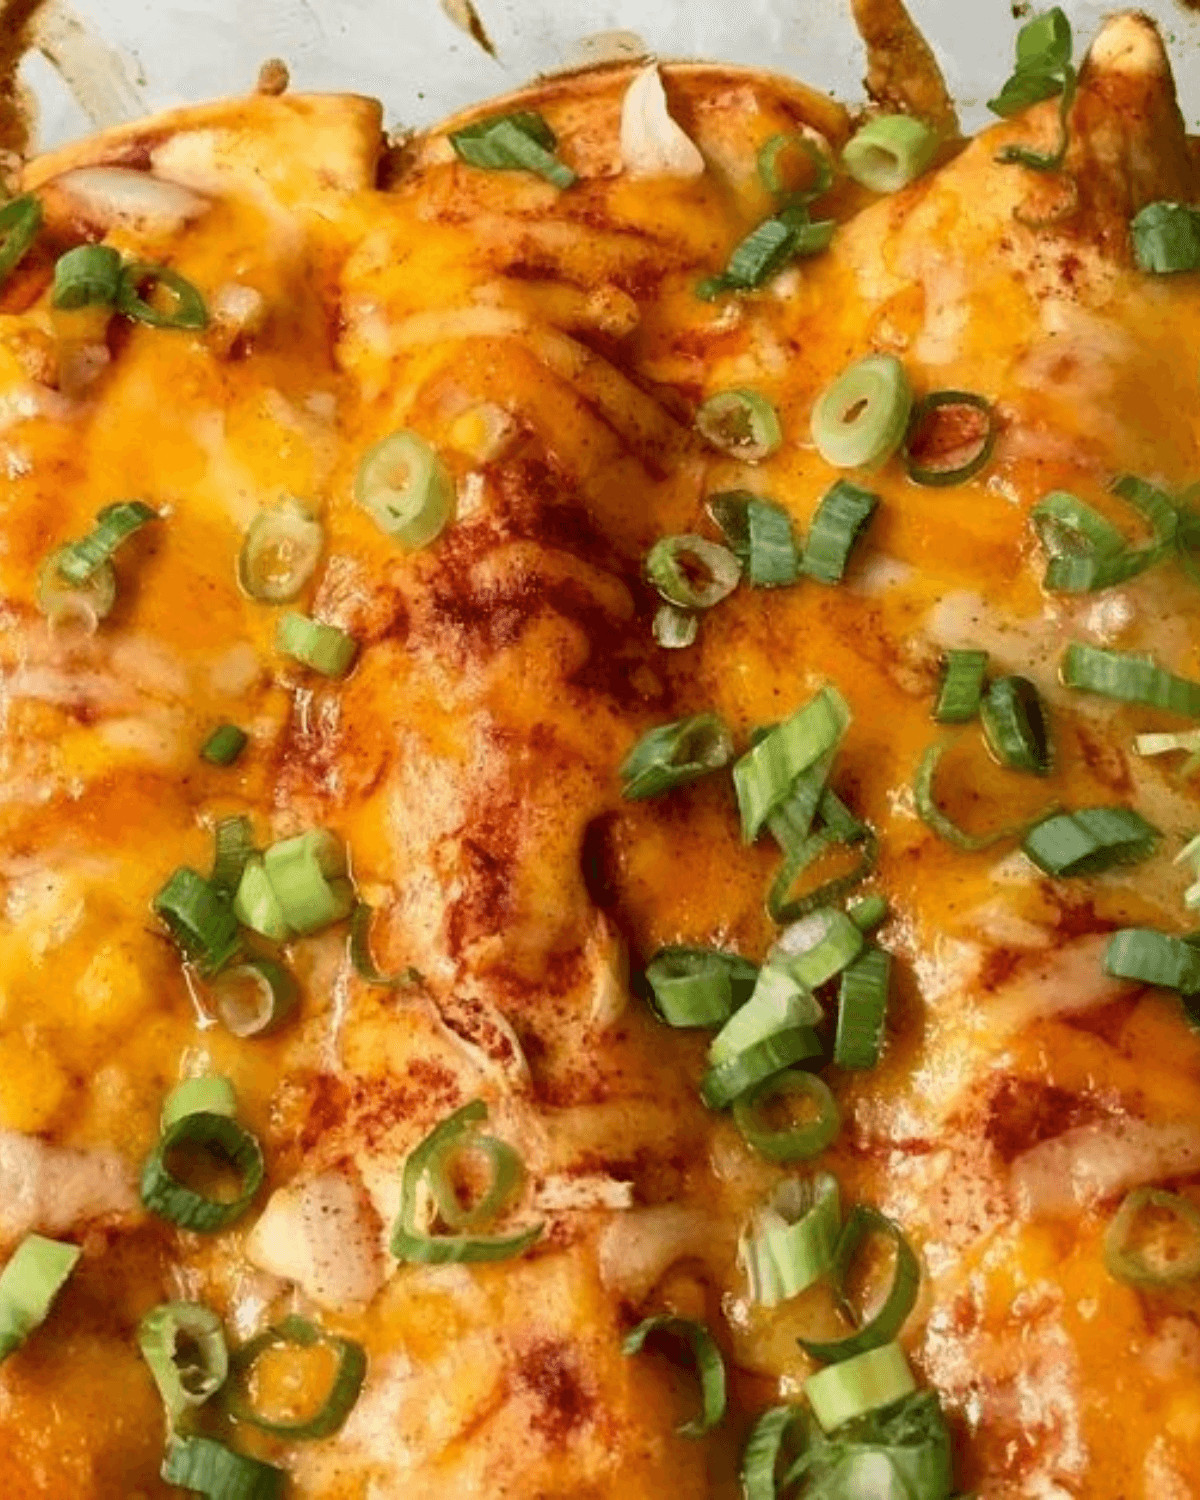 A closeup of the dish topped with melted cheese and green onions, garnished with red spices.